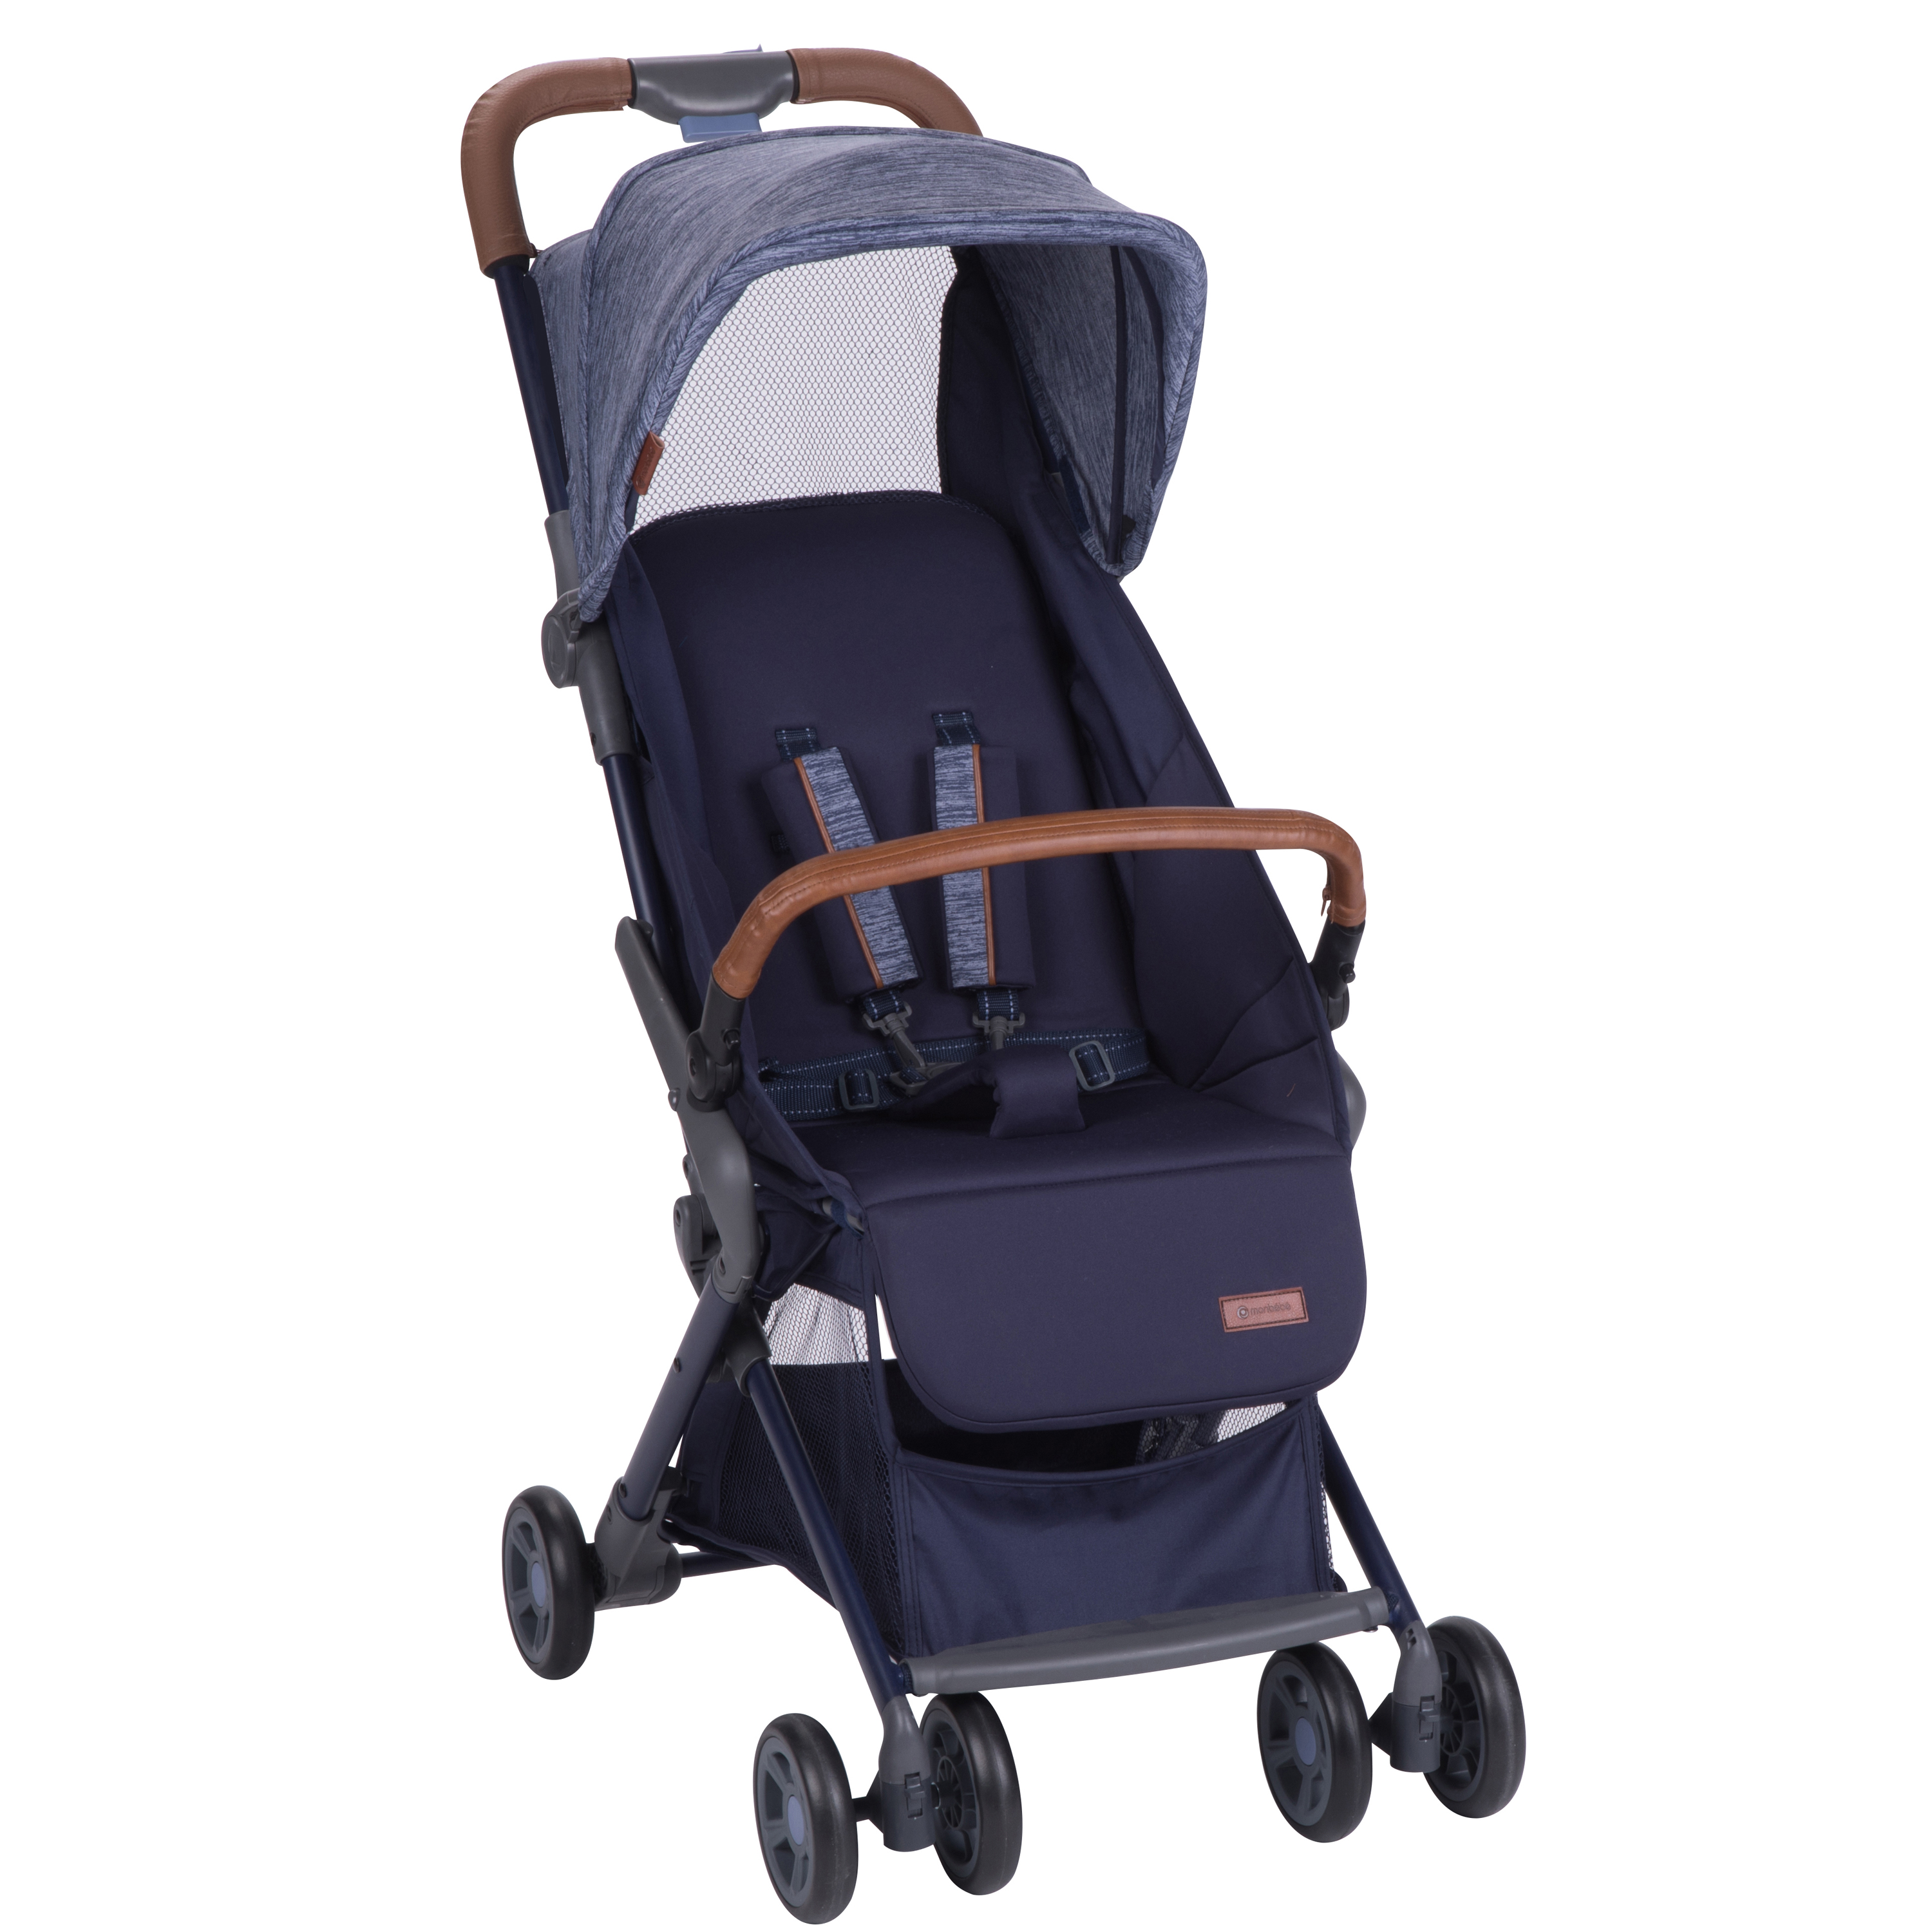 MonBebe Cube Compact Stroller with storage and visor, Blue Boho - image 3 of 17